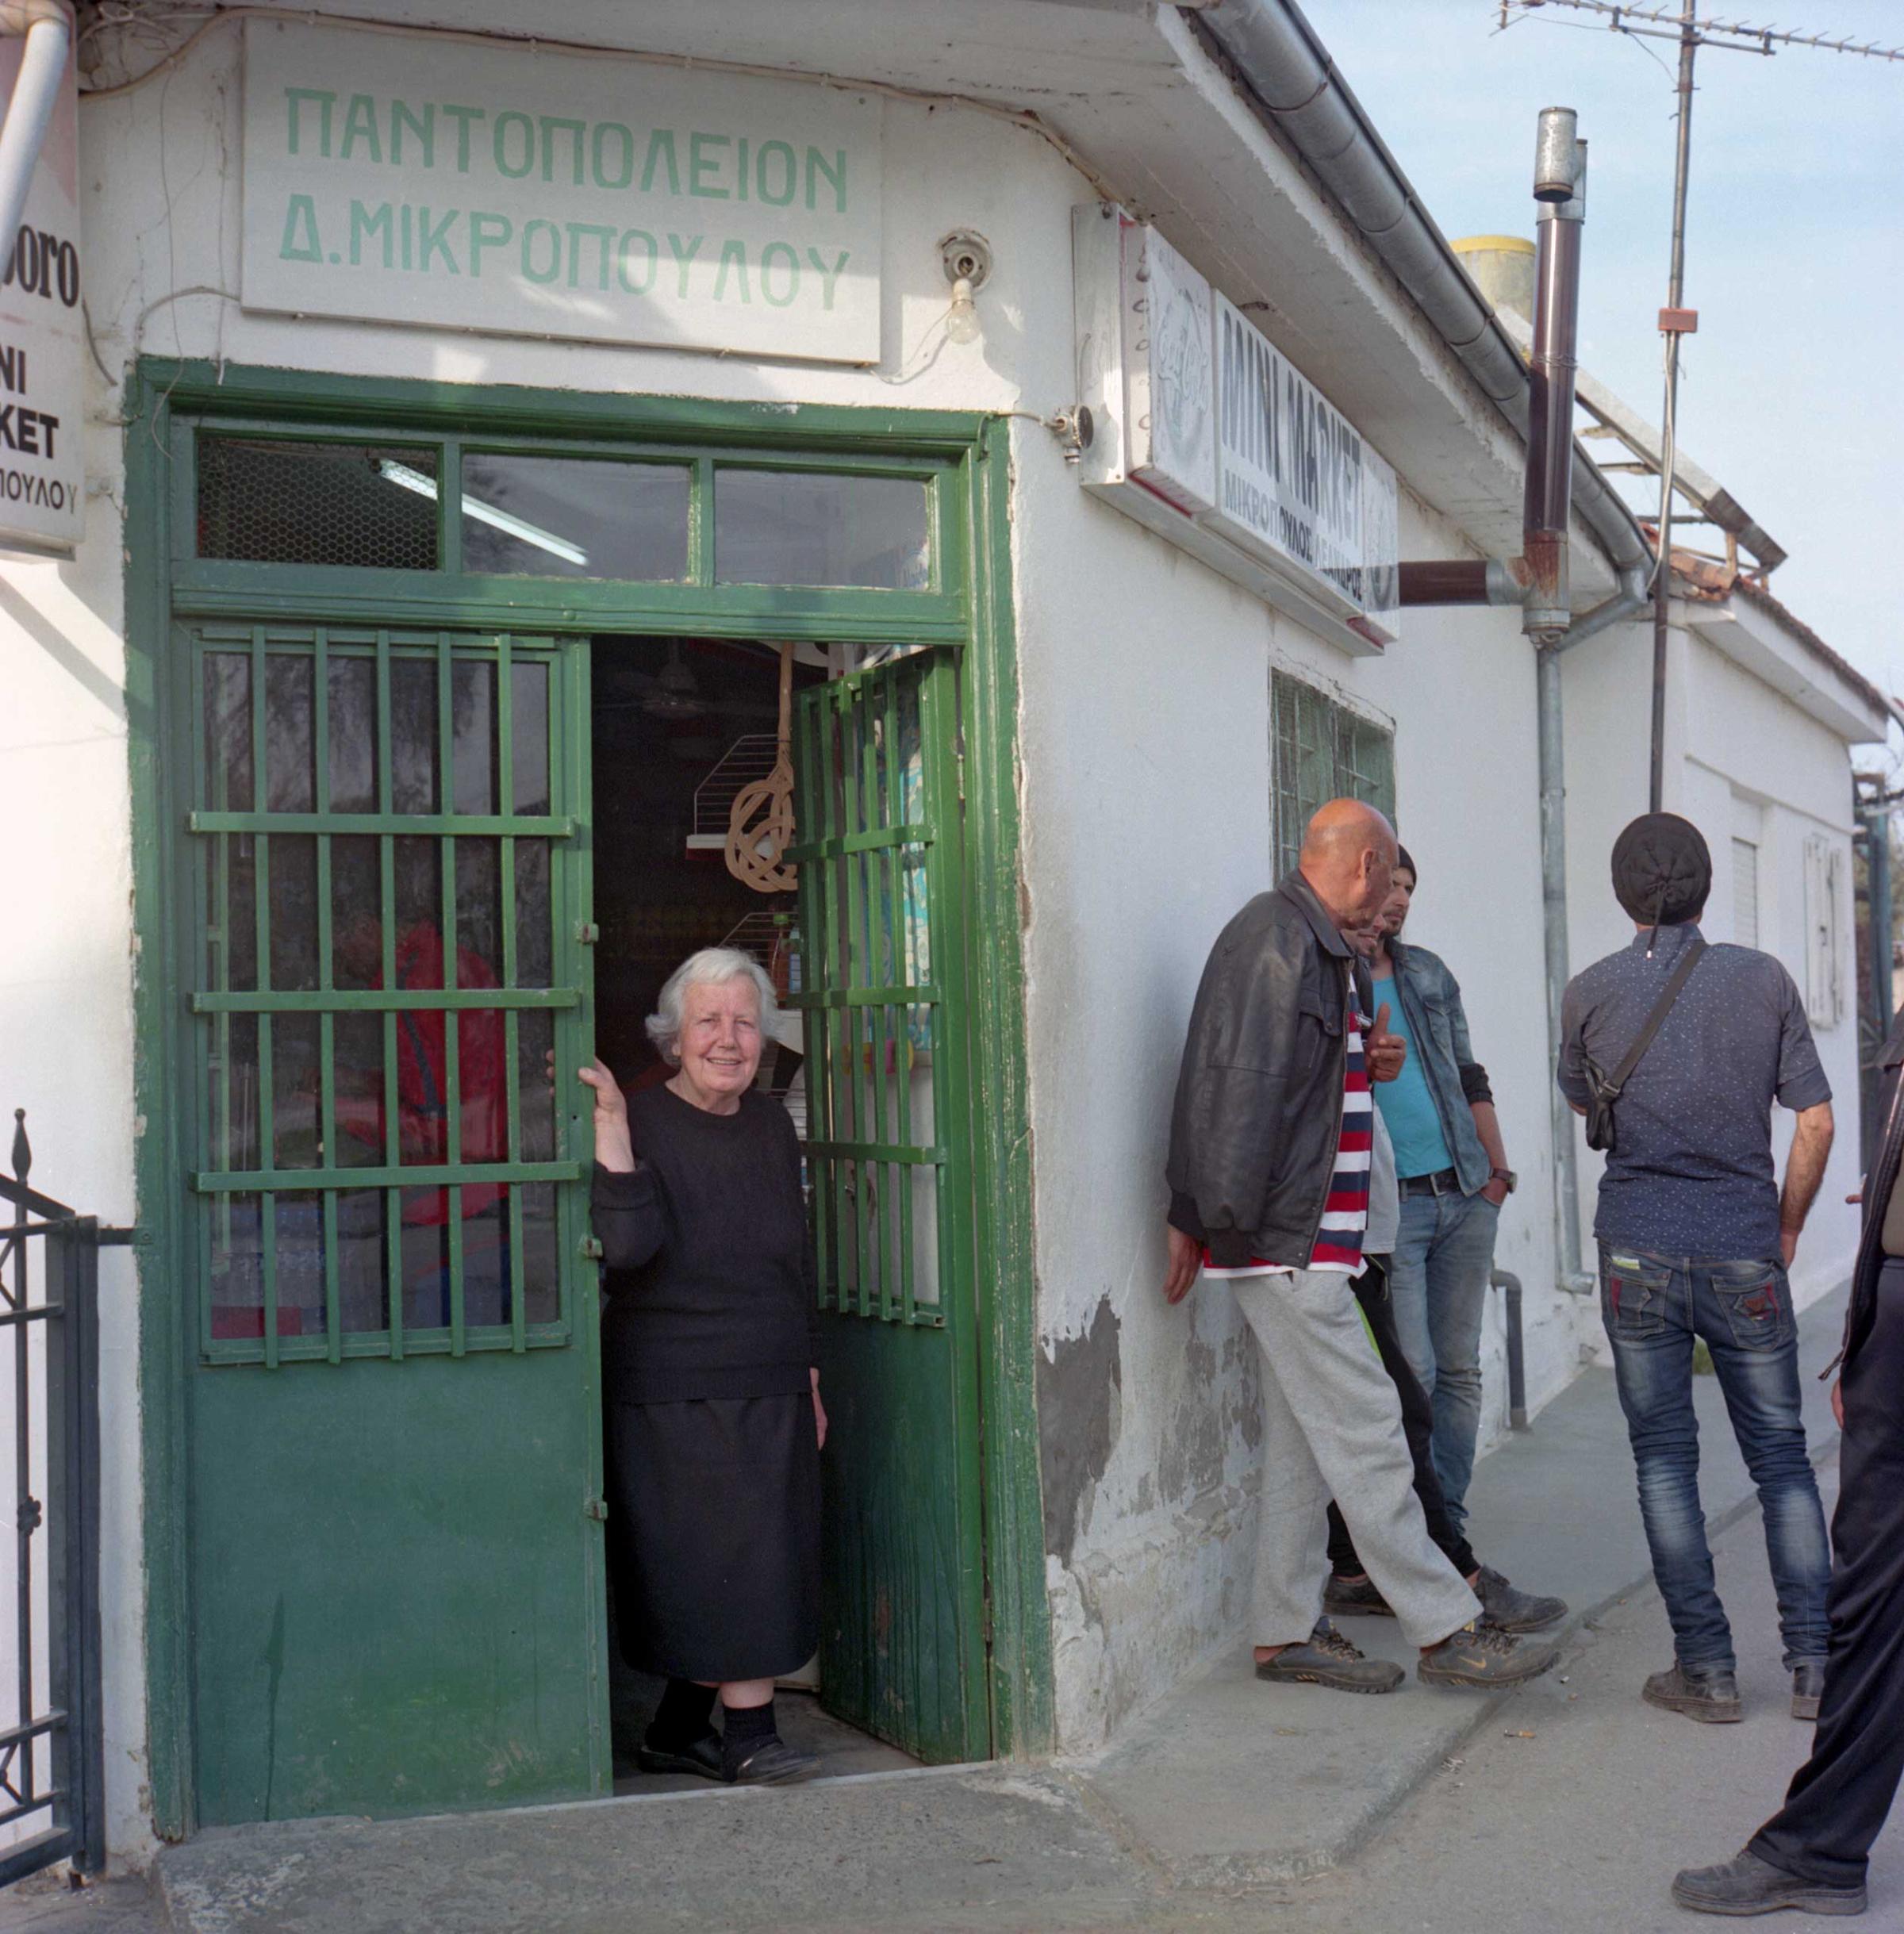 Antonia Mikropolou, 74 y.o. an elderly shopkeeper in Idomeni is cordial with the refugees that come to buy snacks, drinks and cigarettes. Since the inflow of reguees, this small convenience store has been turning much higher profits than before. Idomeni, a small town on the border with Macedonia with a population of only 120 original residents, now hosts more than 10,000 refugees who set up an informal camp here. Idomeni, Greece. April 2016